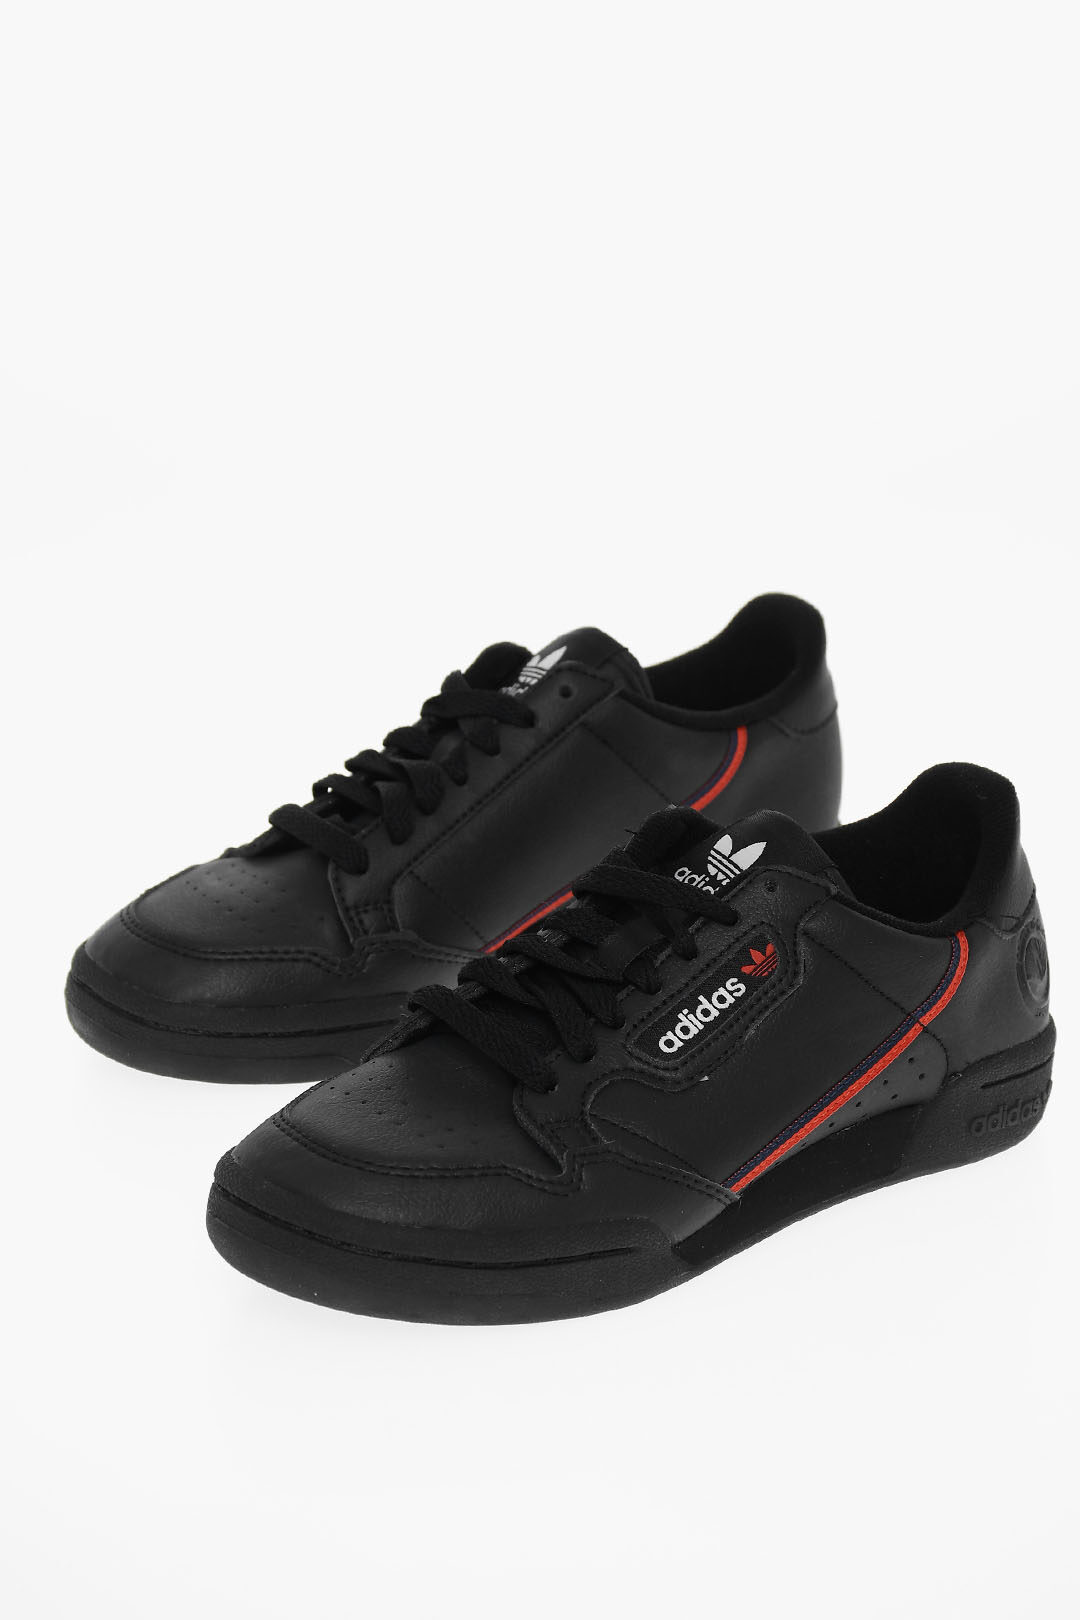 Adidas CONTINENTAL 80 Sneakers men women - Glamood Outlet